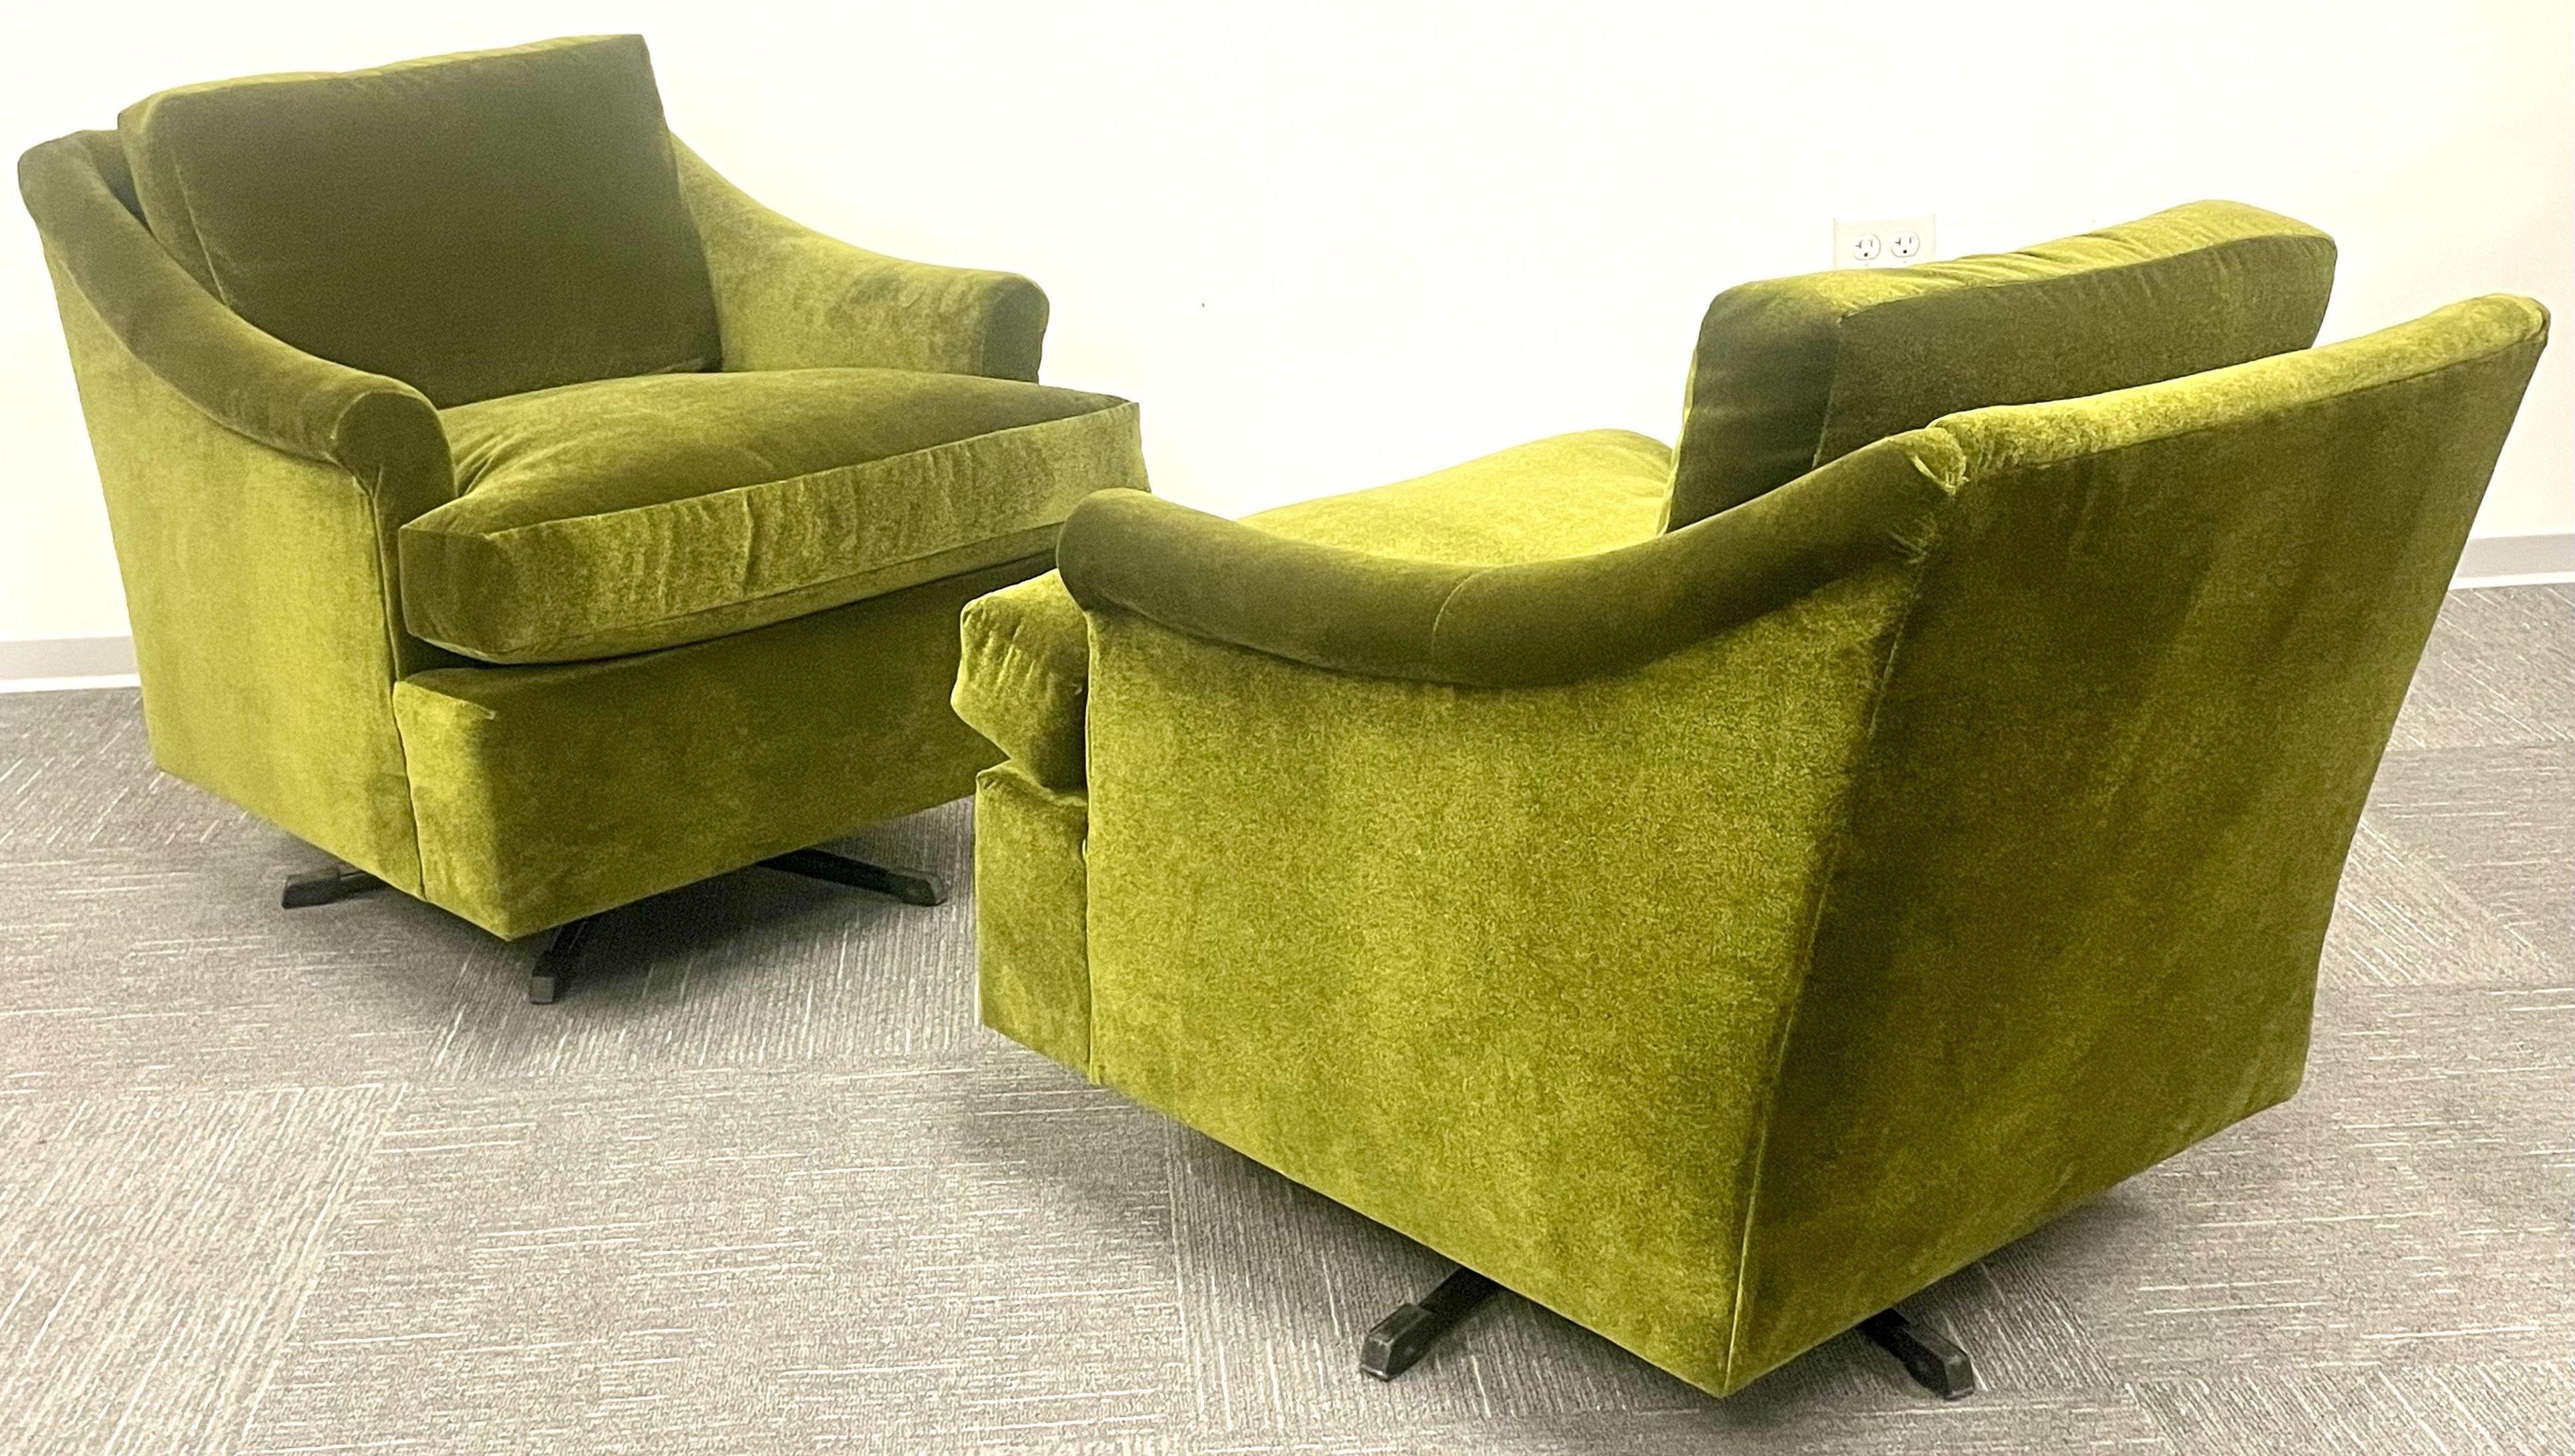 A pair of Milo Baughman style Mid-Century Modern swivel chairs. Each set on a spring swivel base leading to a finely upholstered frame of Olive Green color. This pair of sleek and stylish chairs are sturdy and comfortable.

Steel, olive green